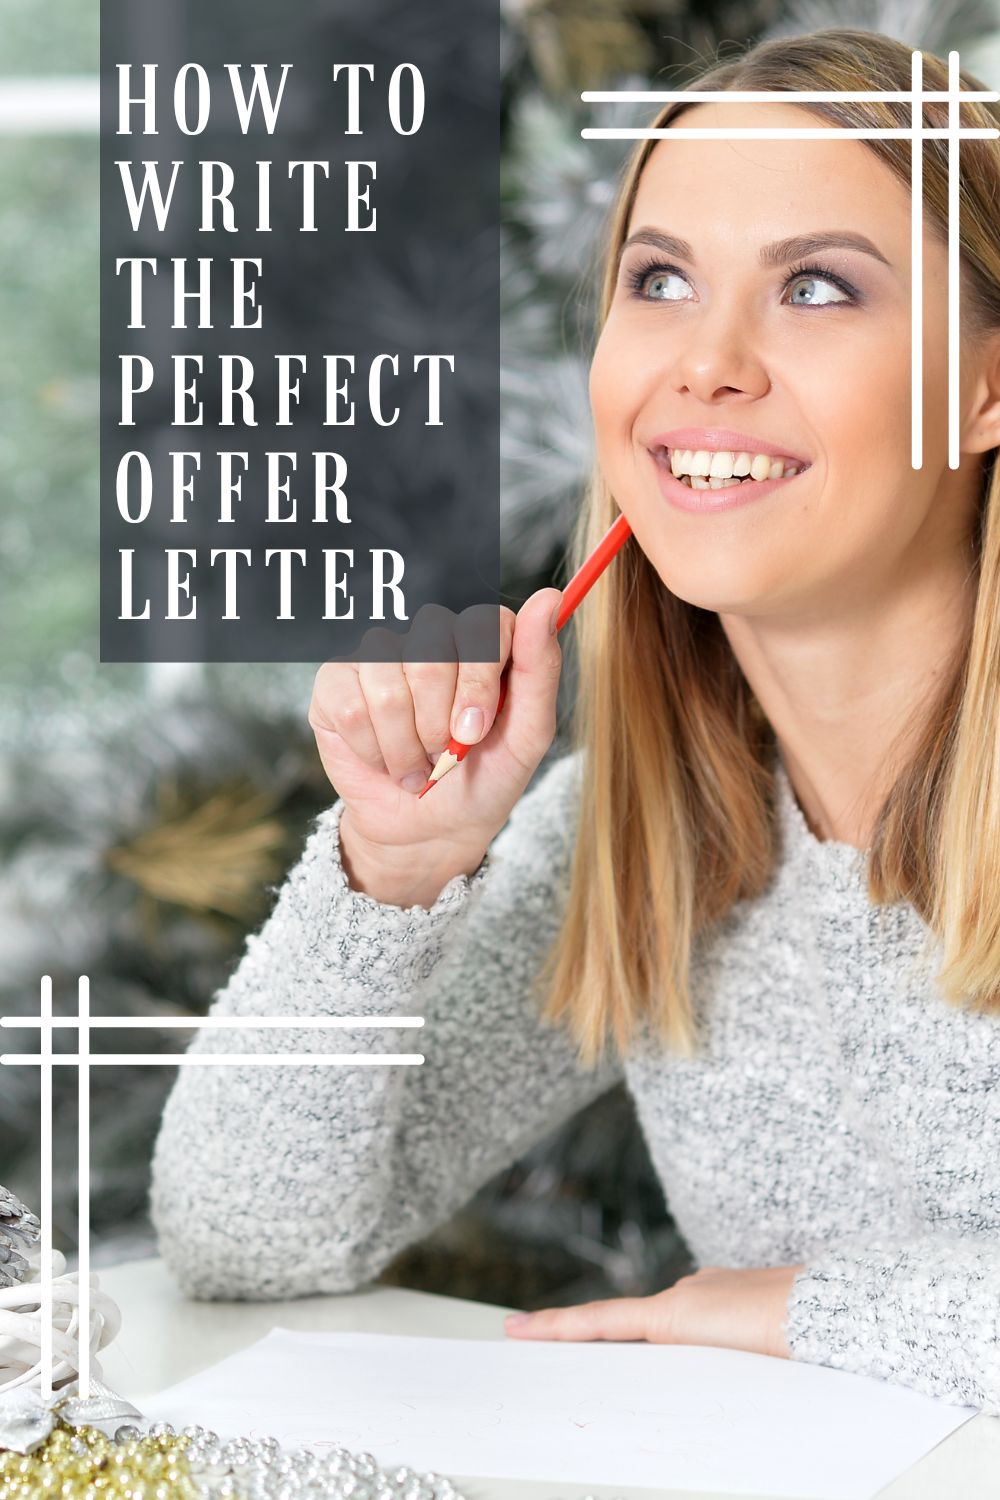 How To Write The Perfect Offer Letter